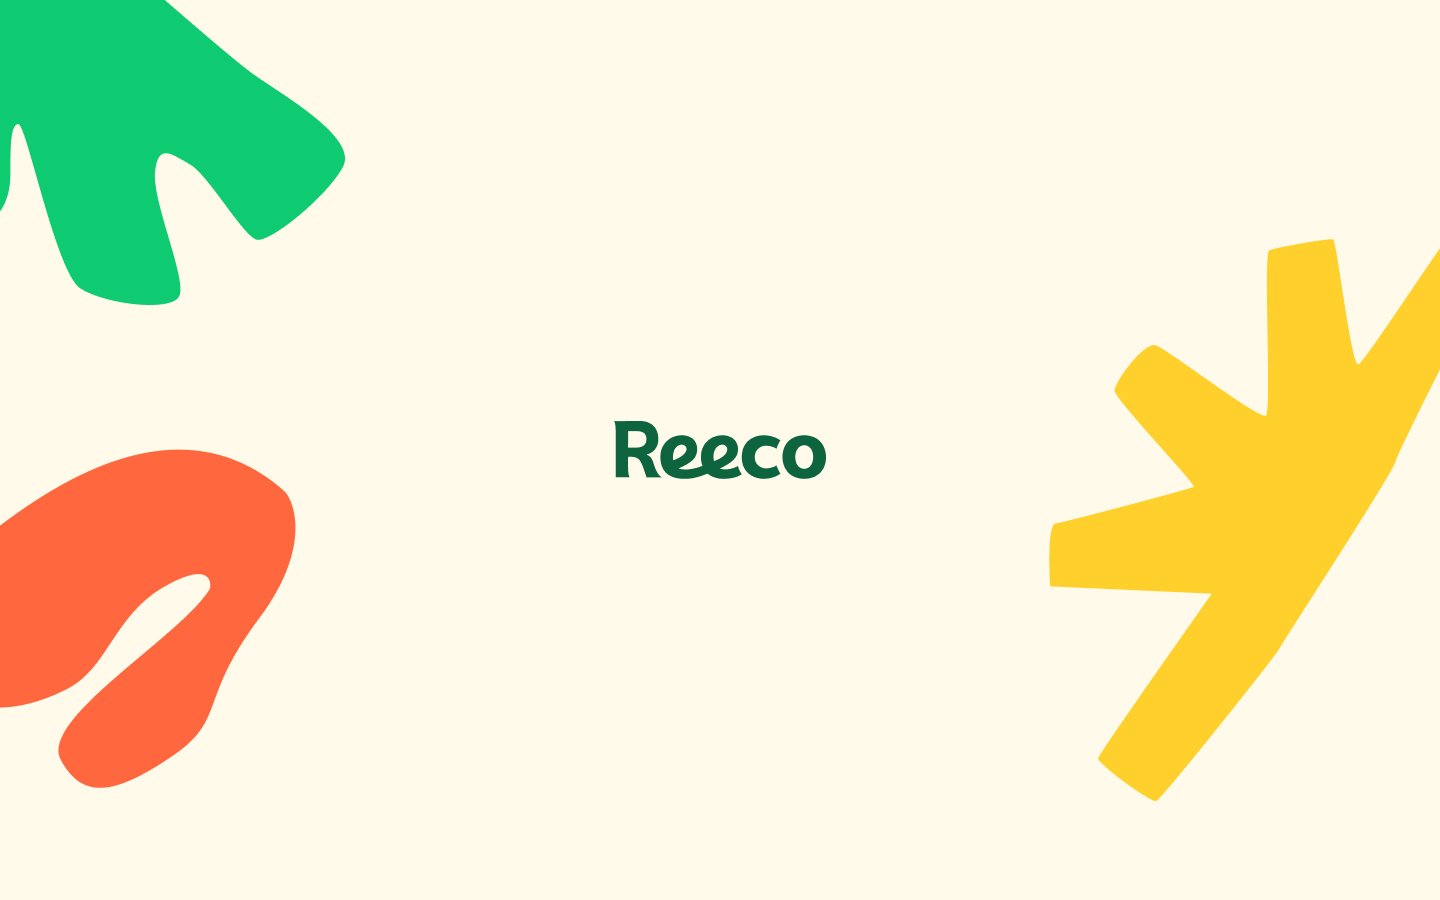 10-Day Brand Sprint for Reeco